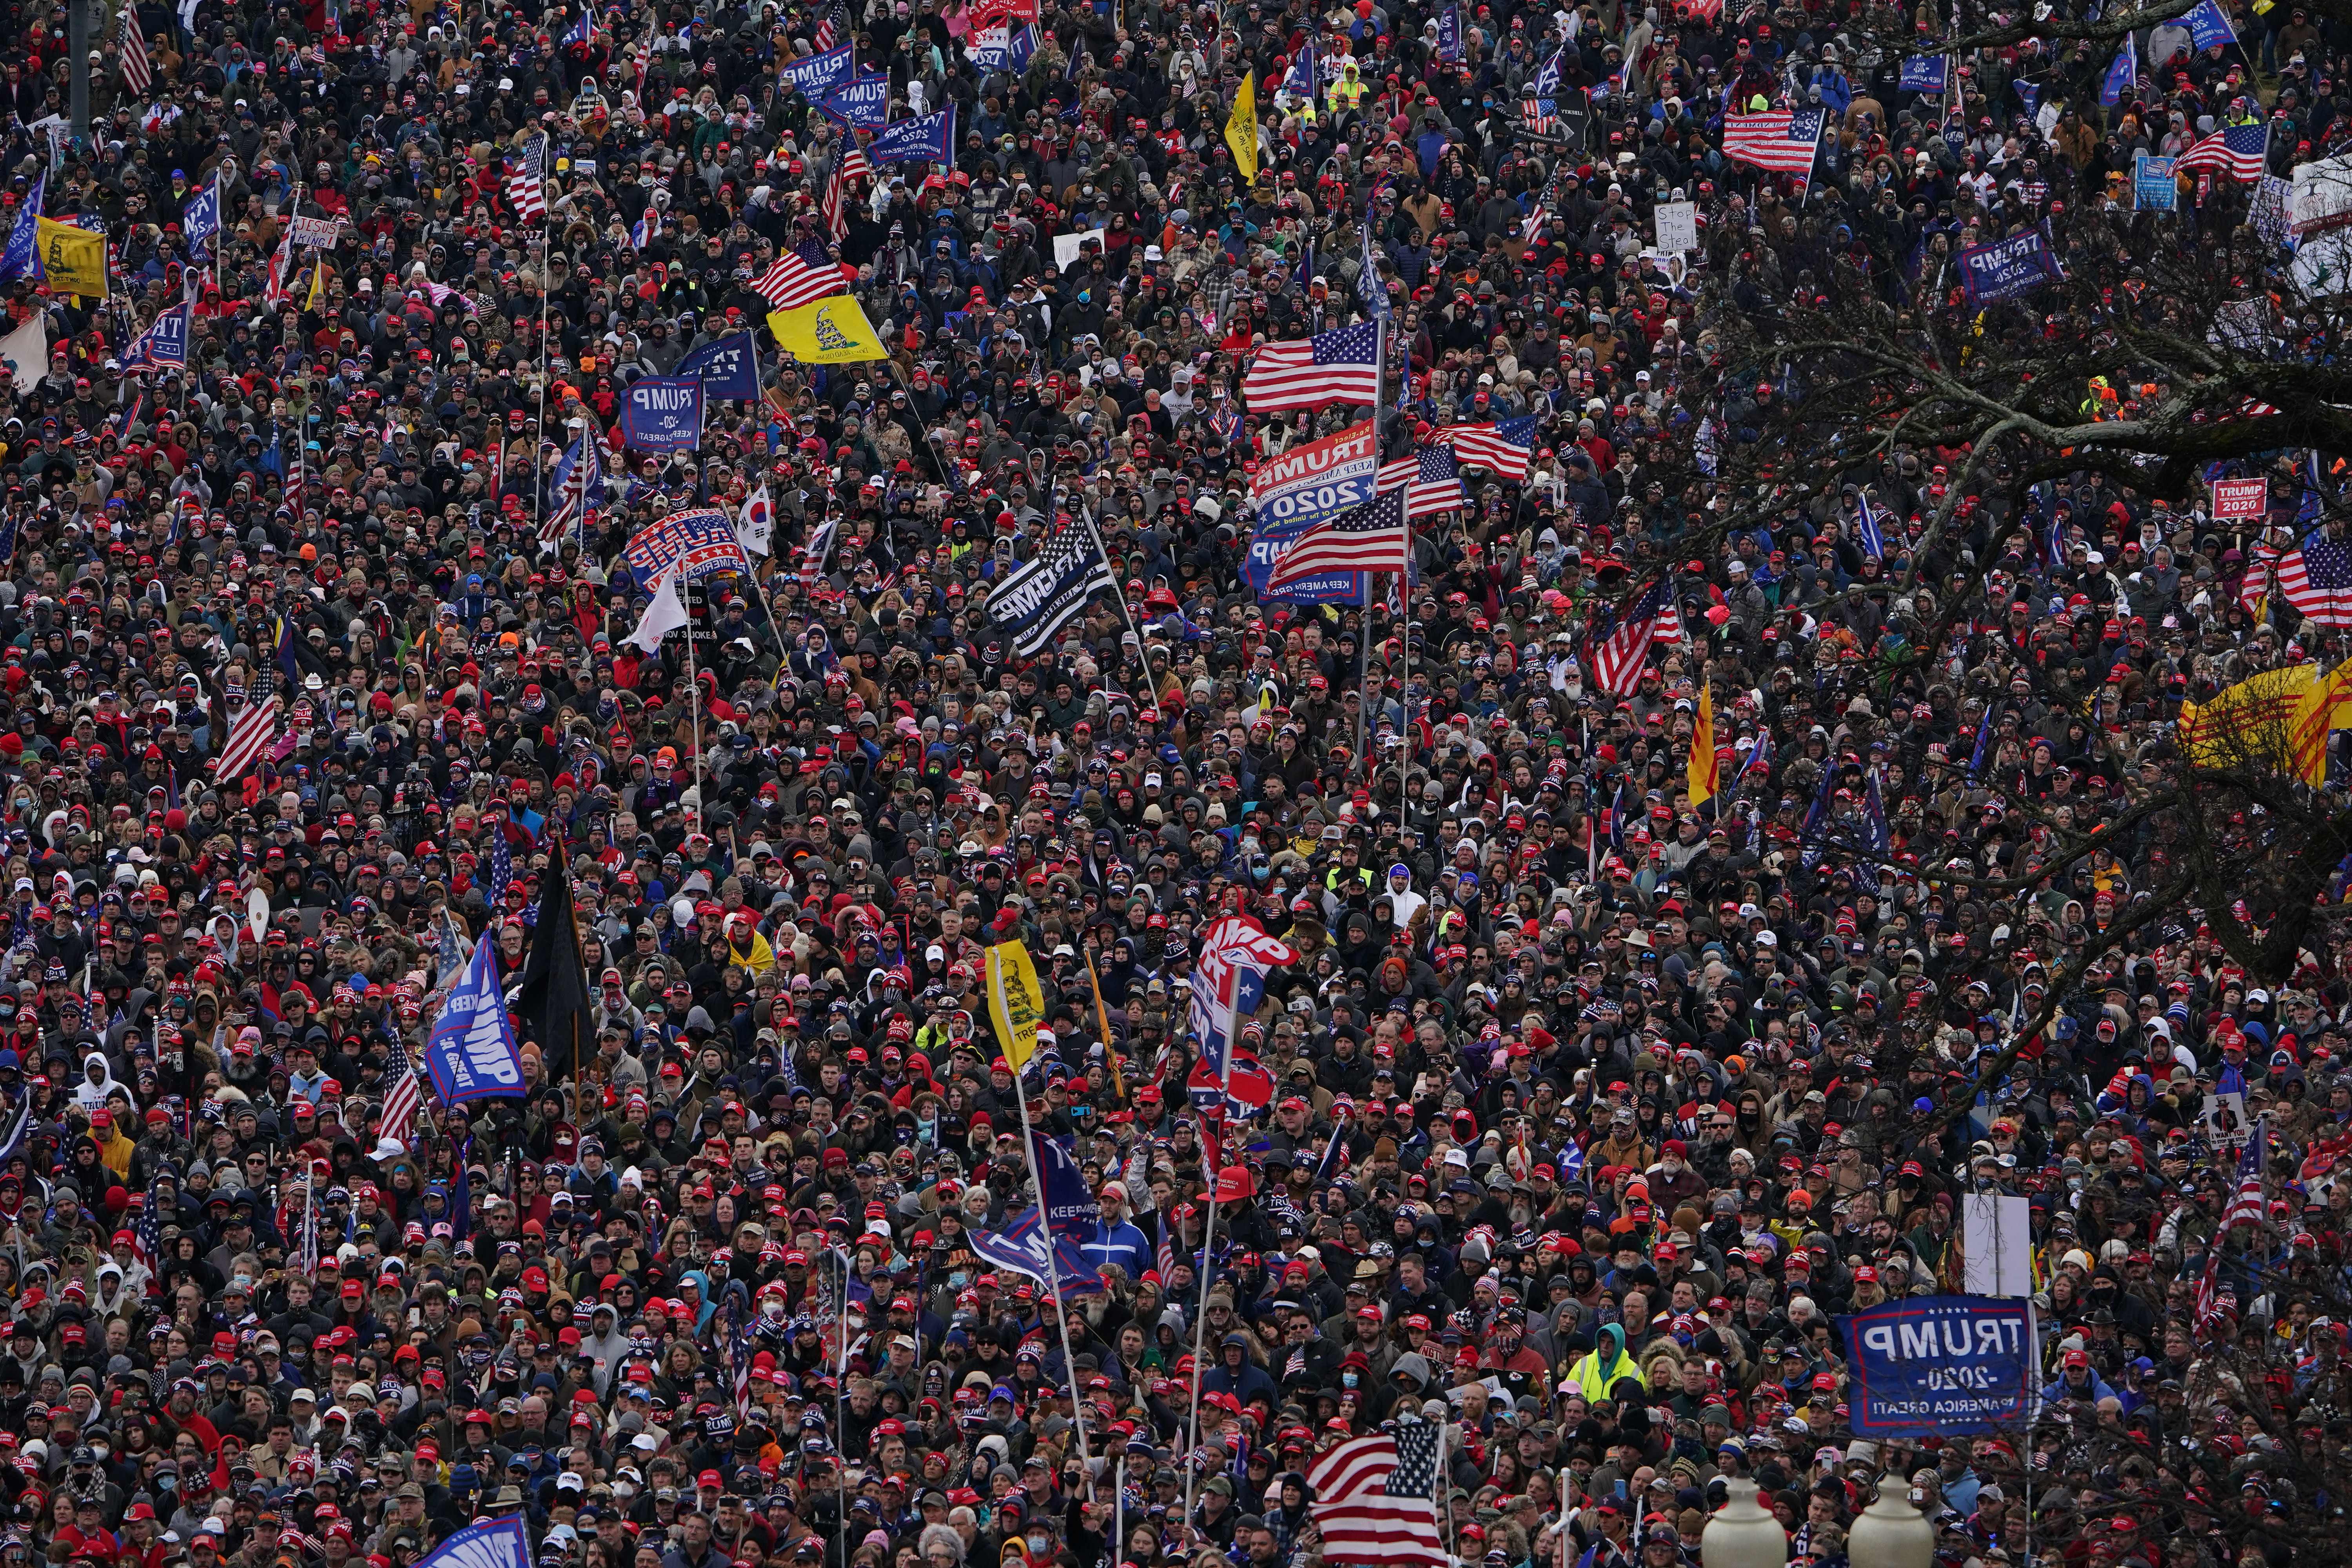 Supporters of President Donald Trump fill the National Mall on Jan. 6.